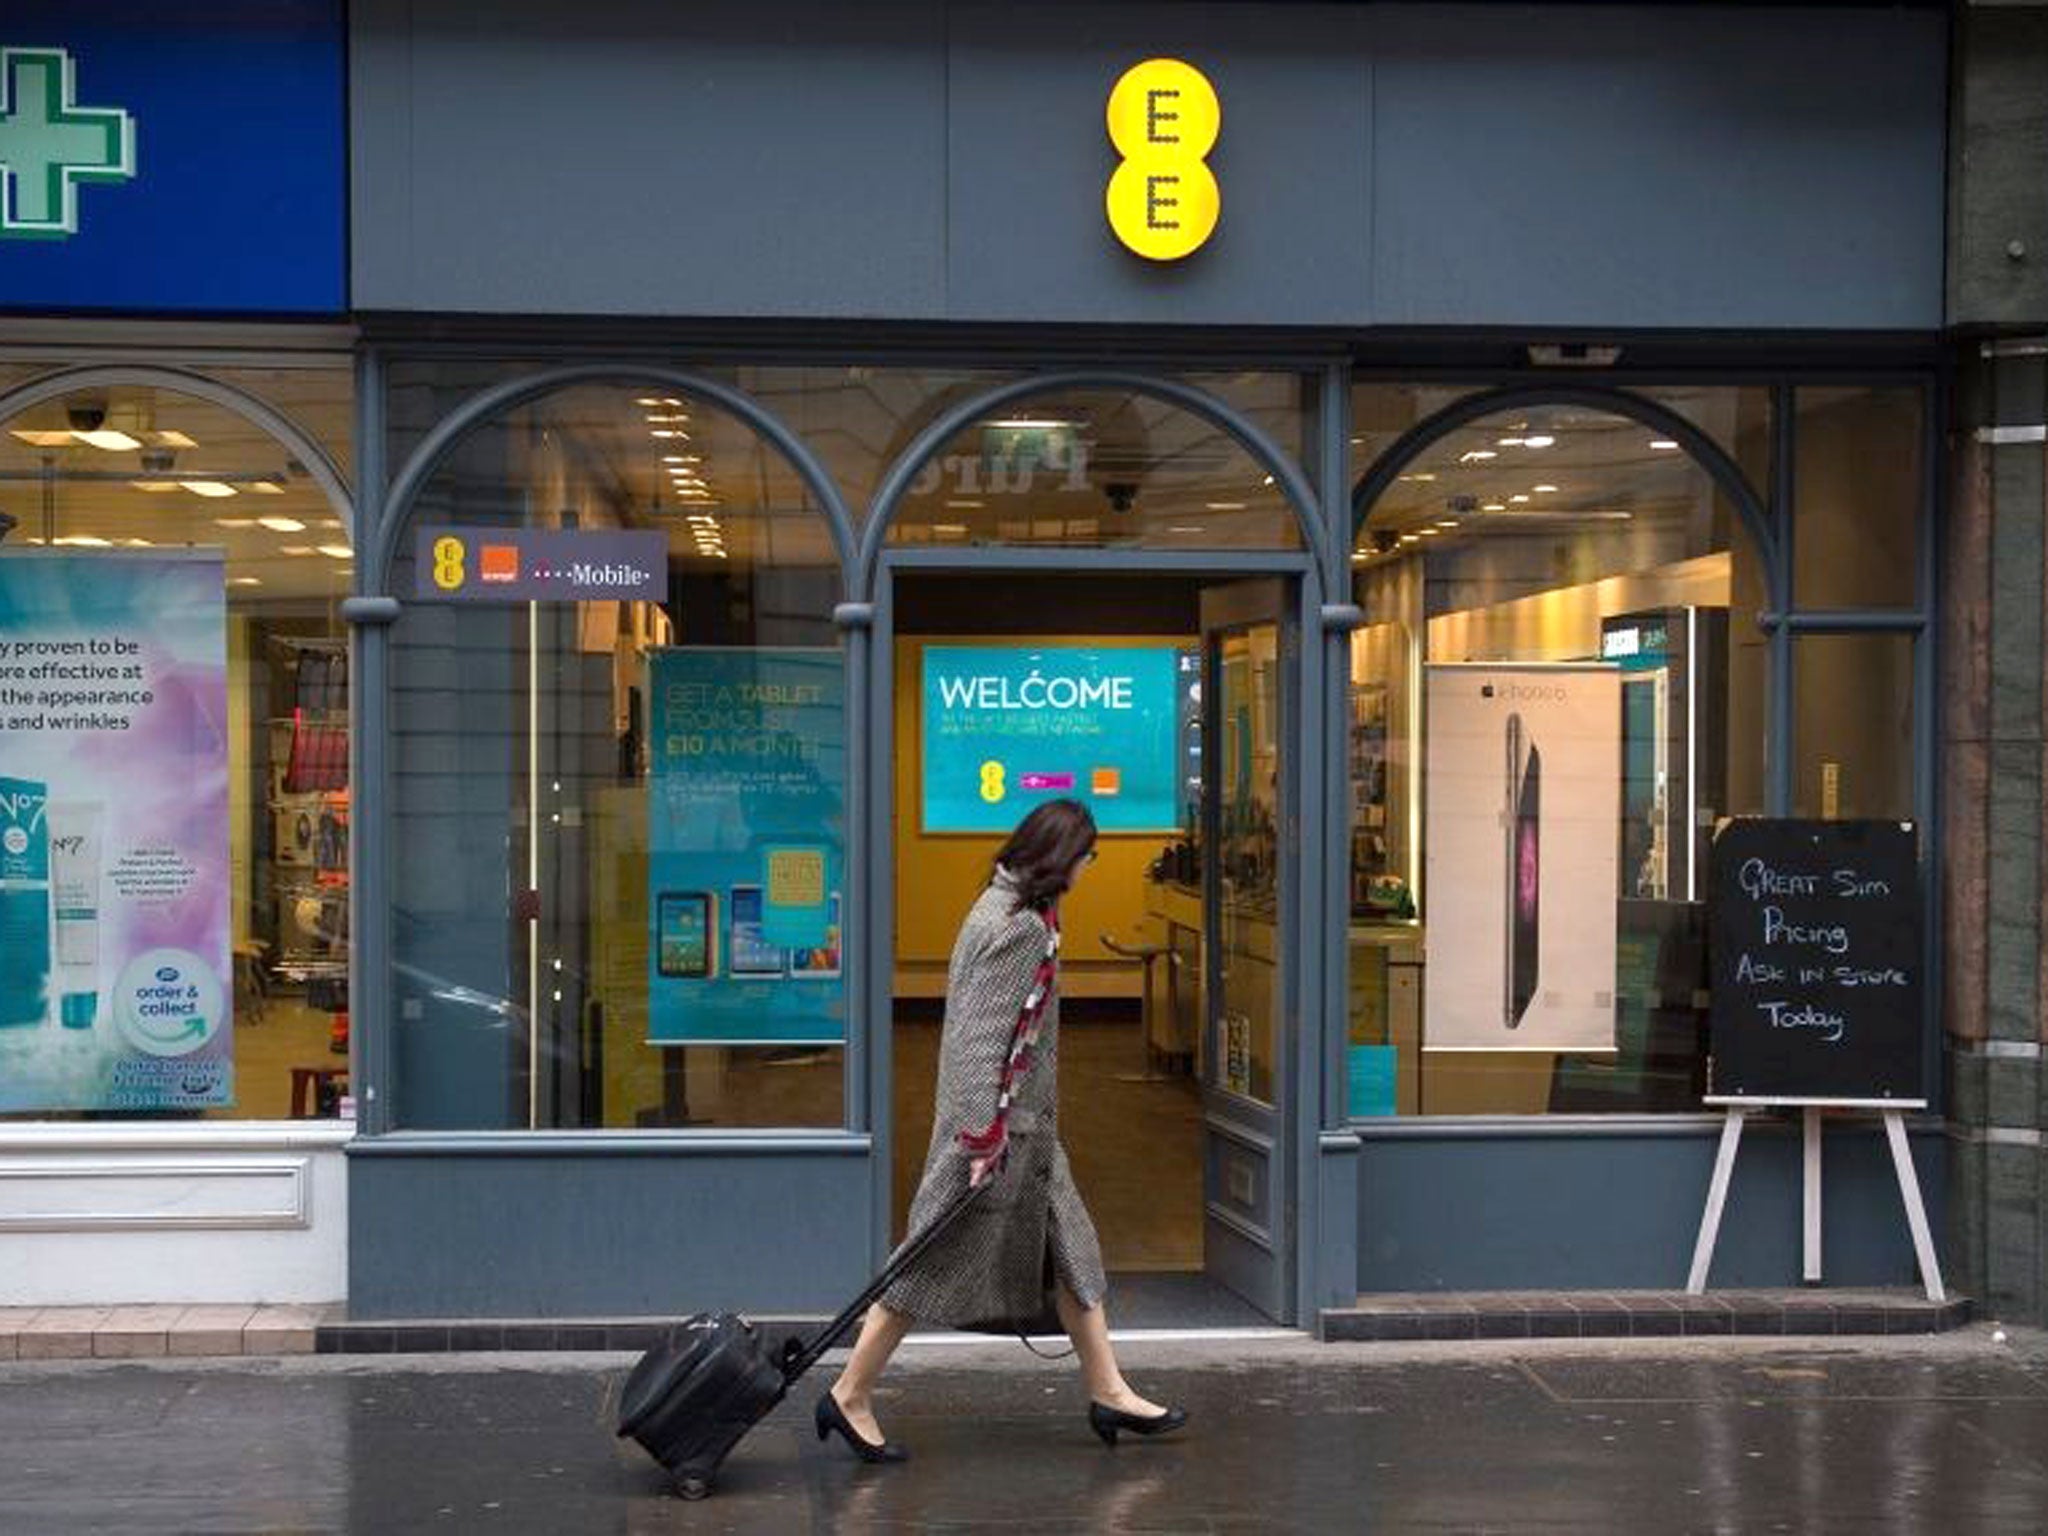 Customers of the phone giant EE had mixed fortunes after encountering unexpected problems